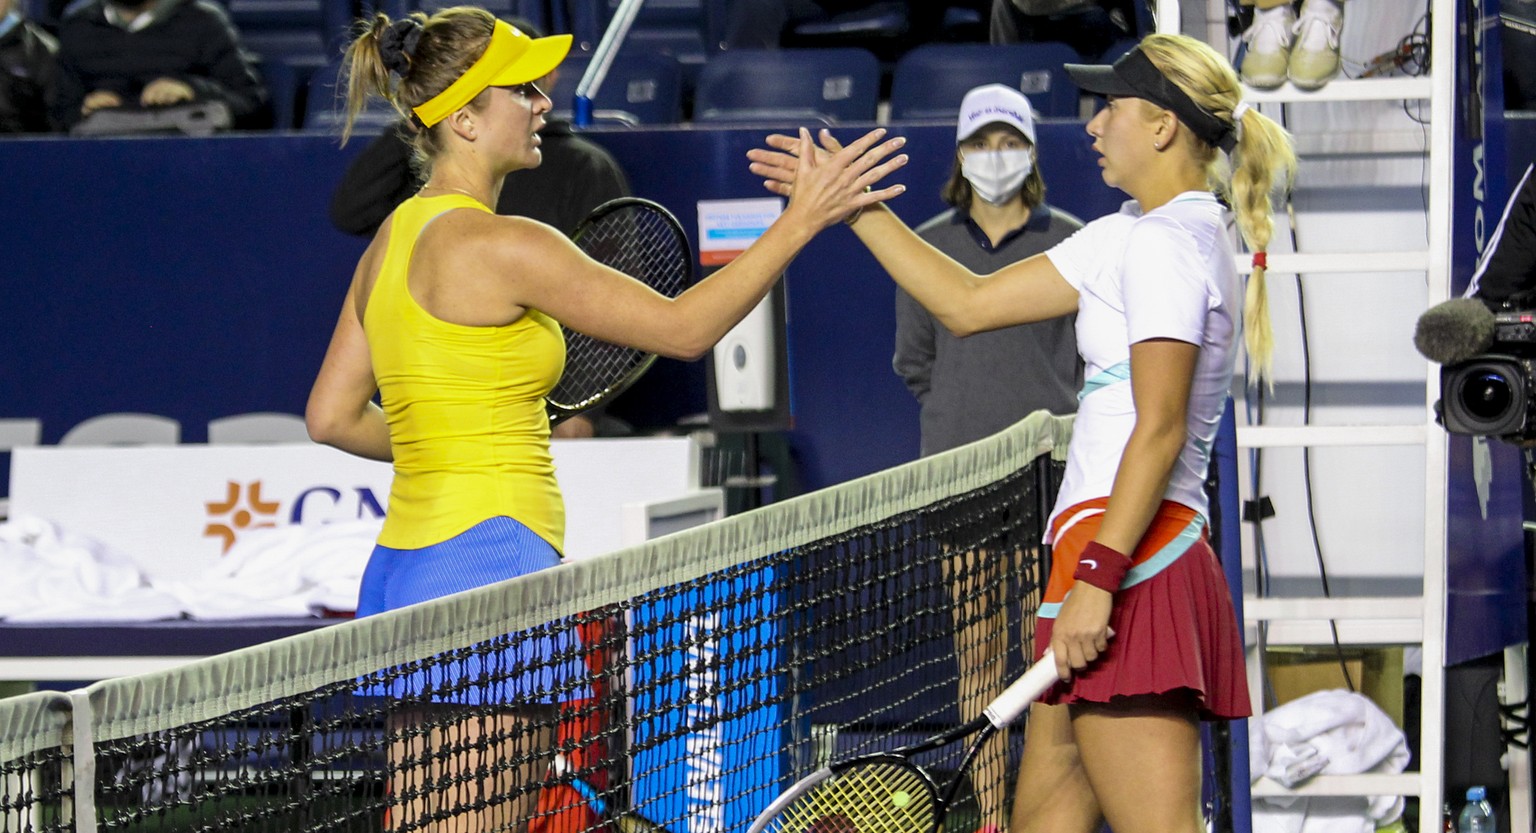 Elina Svitolina of Ukraine, left, and Anastasia Potapova of Russia shake hands after their match at the Abierto de Monterrey tennis tournament in Monterrey, Mexico, Tuesday, March 1, 2022. (AP Photo)